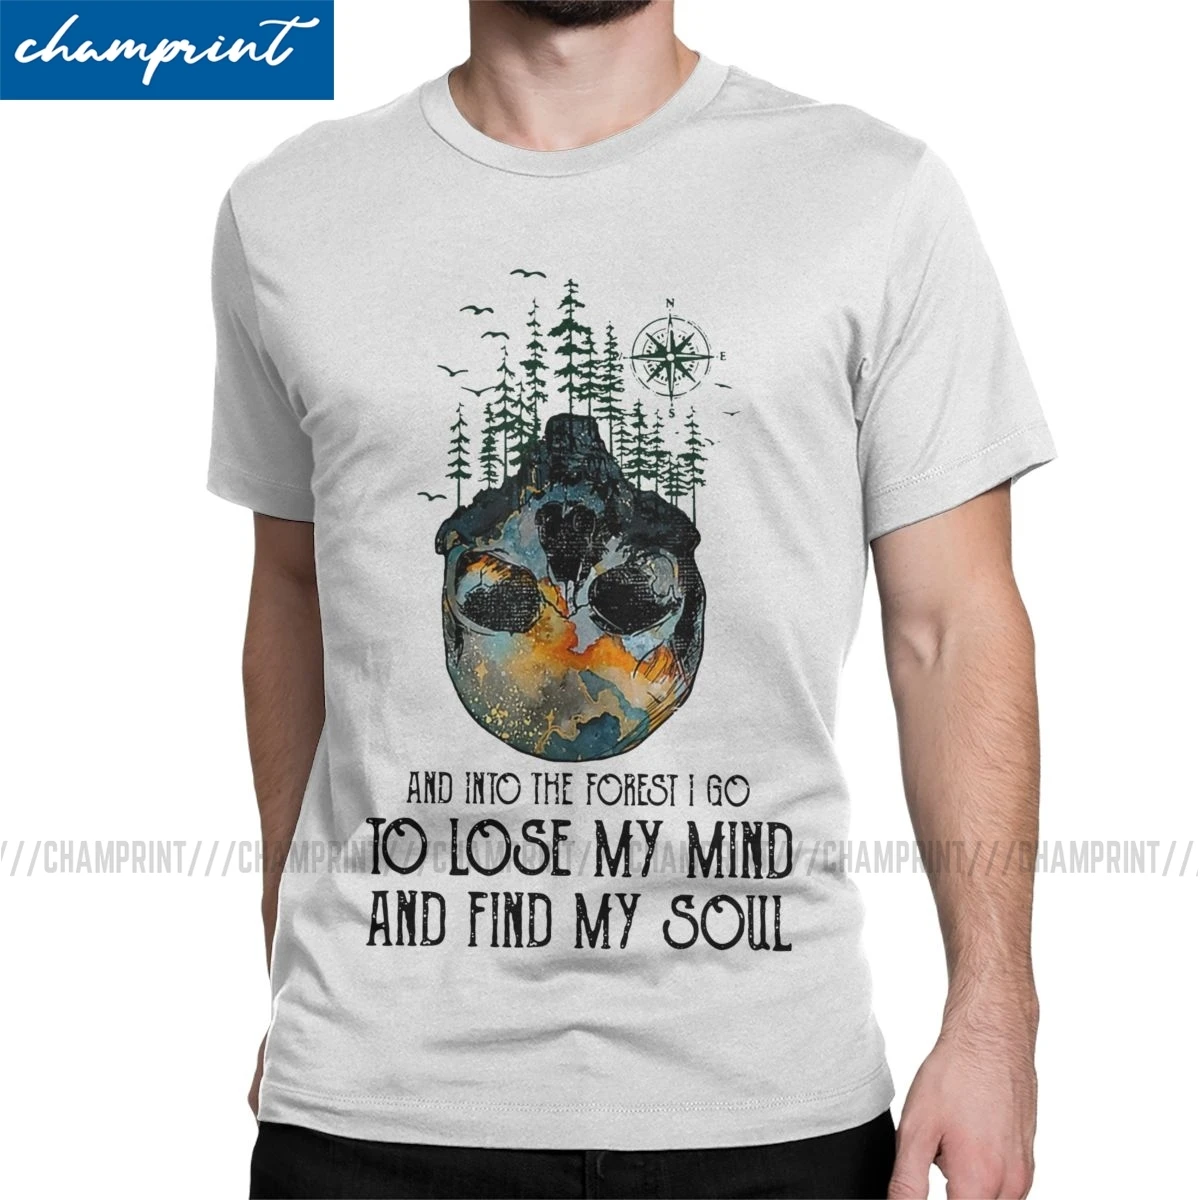 Leisure Into The Forest I Go To Lose My Mind Find My Soul T-Shirt Men Crew Neck T Shirts Hippie Nature Camping Tees Gift Idea